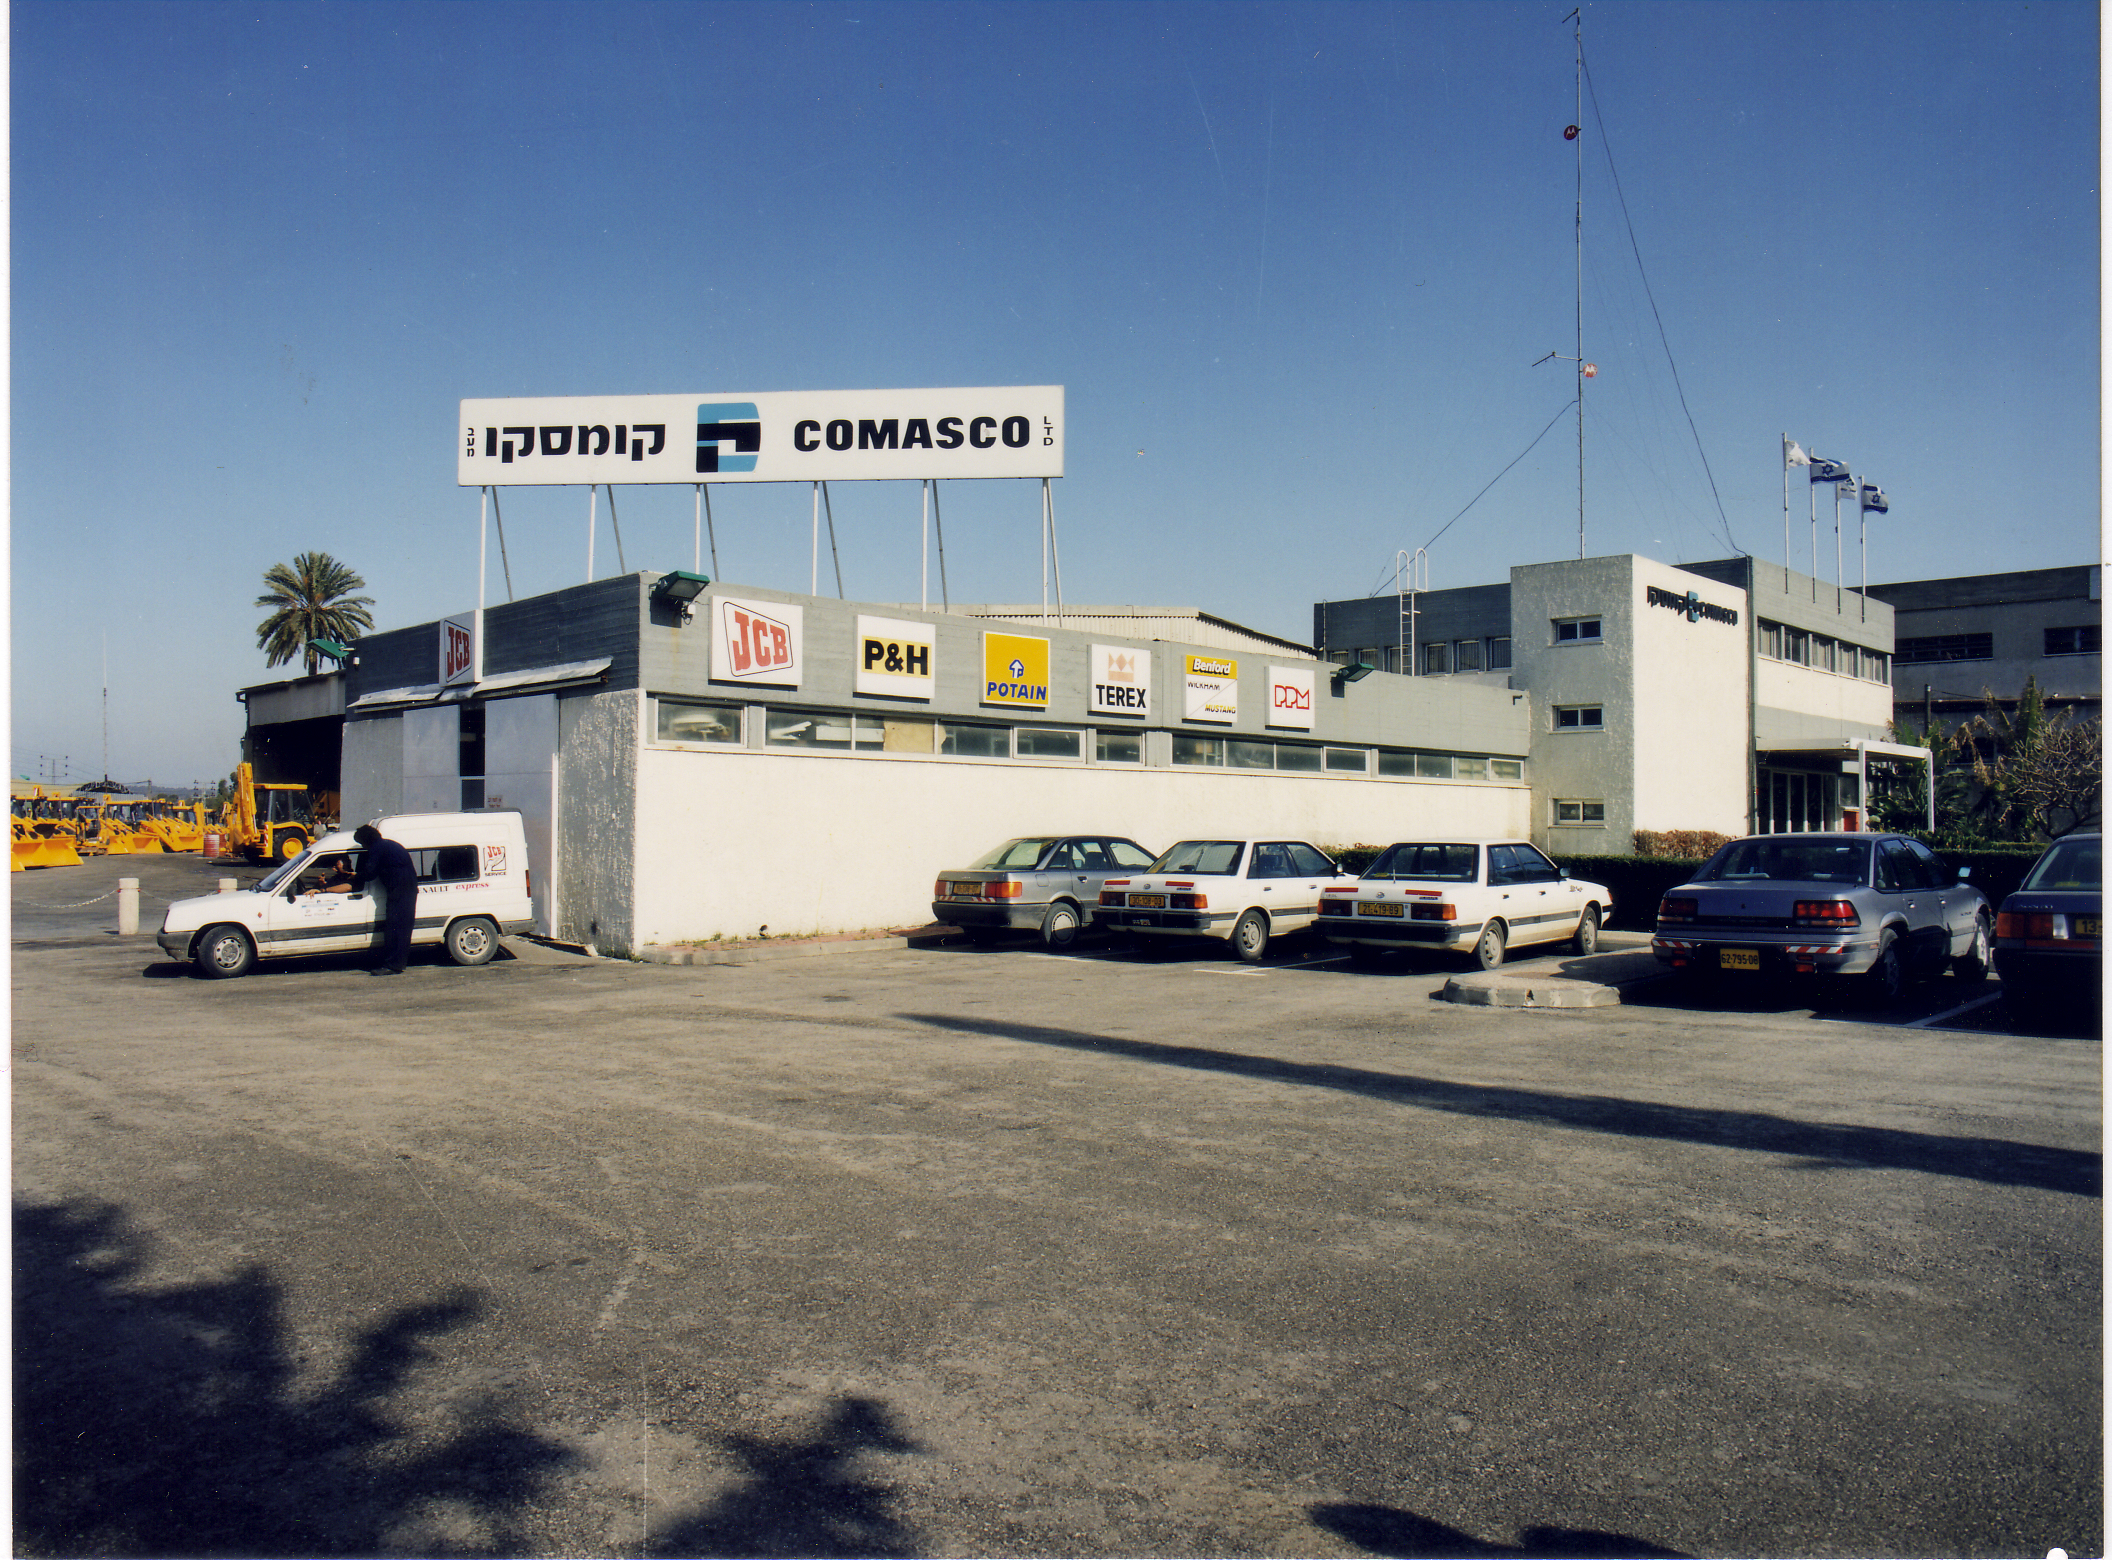 Old Comasco garage and ofices in Petah-Tikva